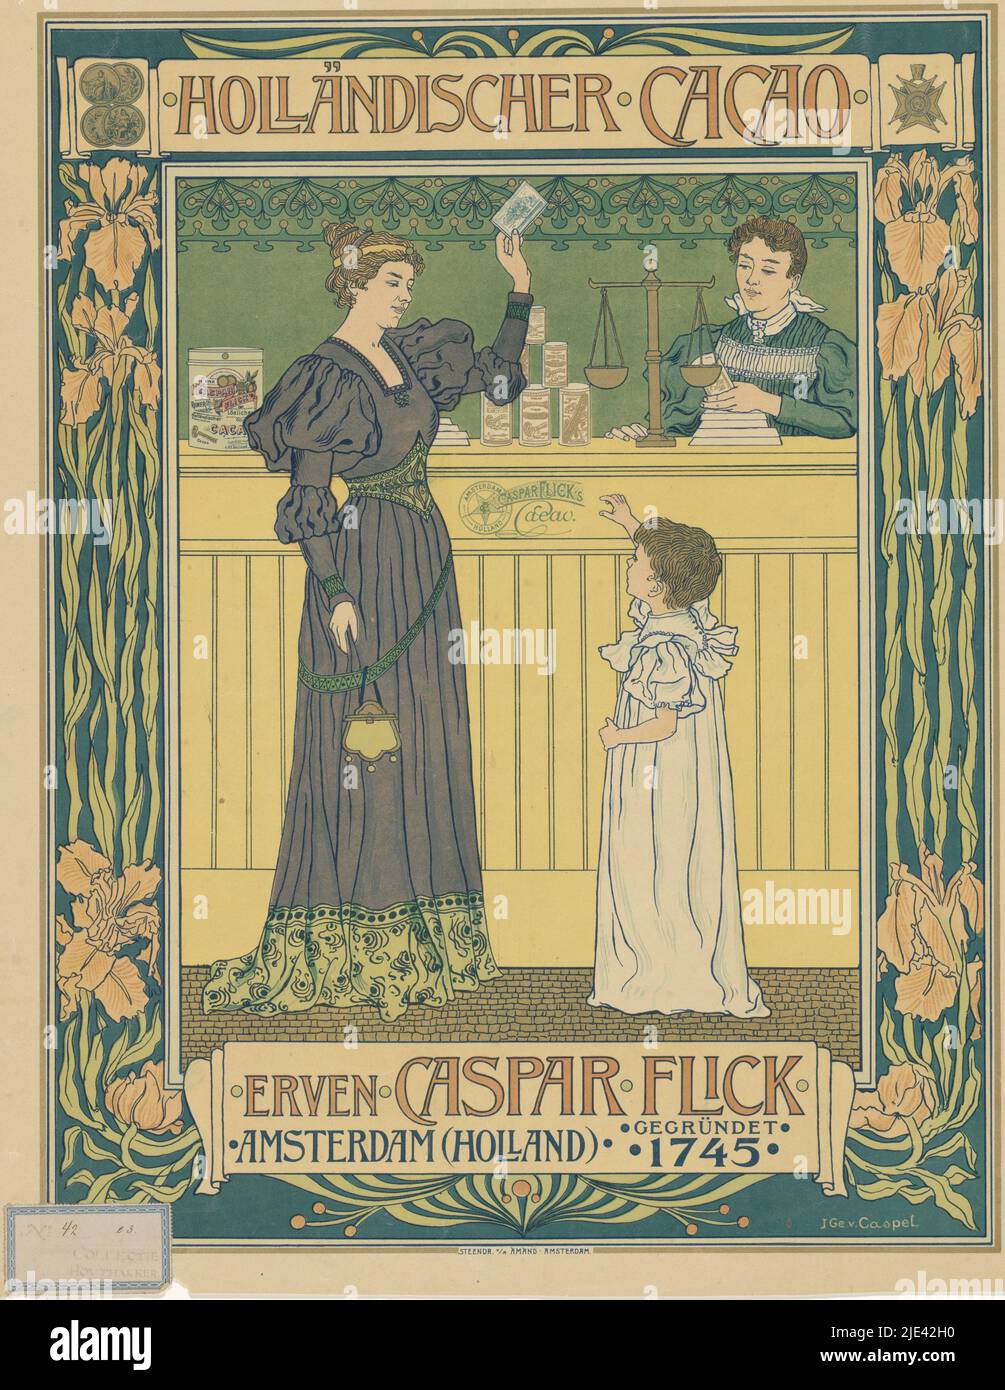 Höllandischer Cacao. Caspar Flick heirs, Johann Georg van Caspel, 1897, A woman and a girl stand in front of a counter and buy a can of cocoa. Poster for Flicks cocoa., print maker: Johann Georg van Caspel, (mentioned on object), designer: Johann Georg van Caspel, (mentioned on object), printer: Steendrukkerij voorheen Amand N.V., (mentioned on object), Amsterdam, 1897, paper, h 503 mm × w 413 mm Stock Photo